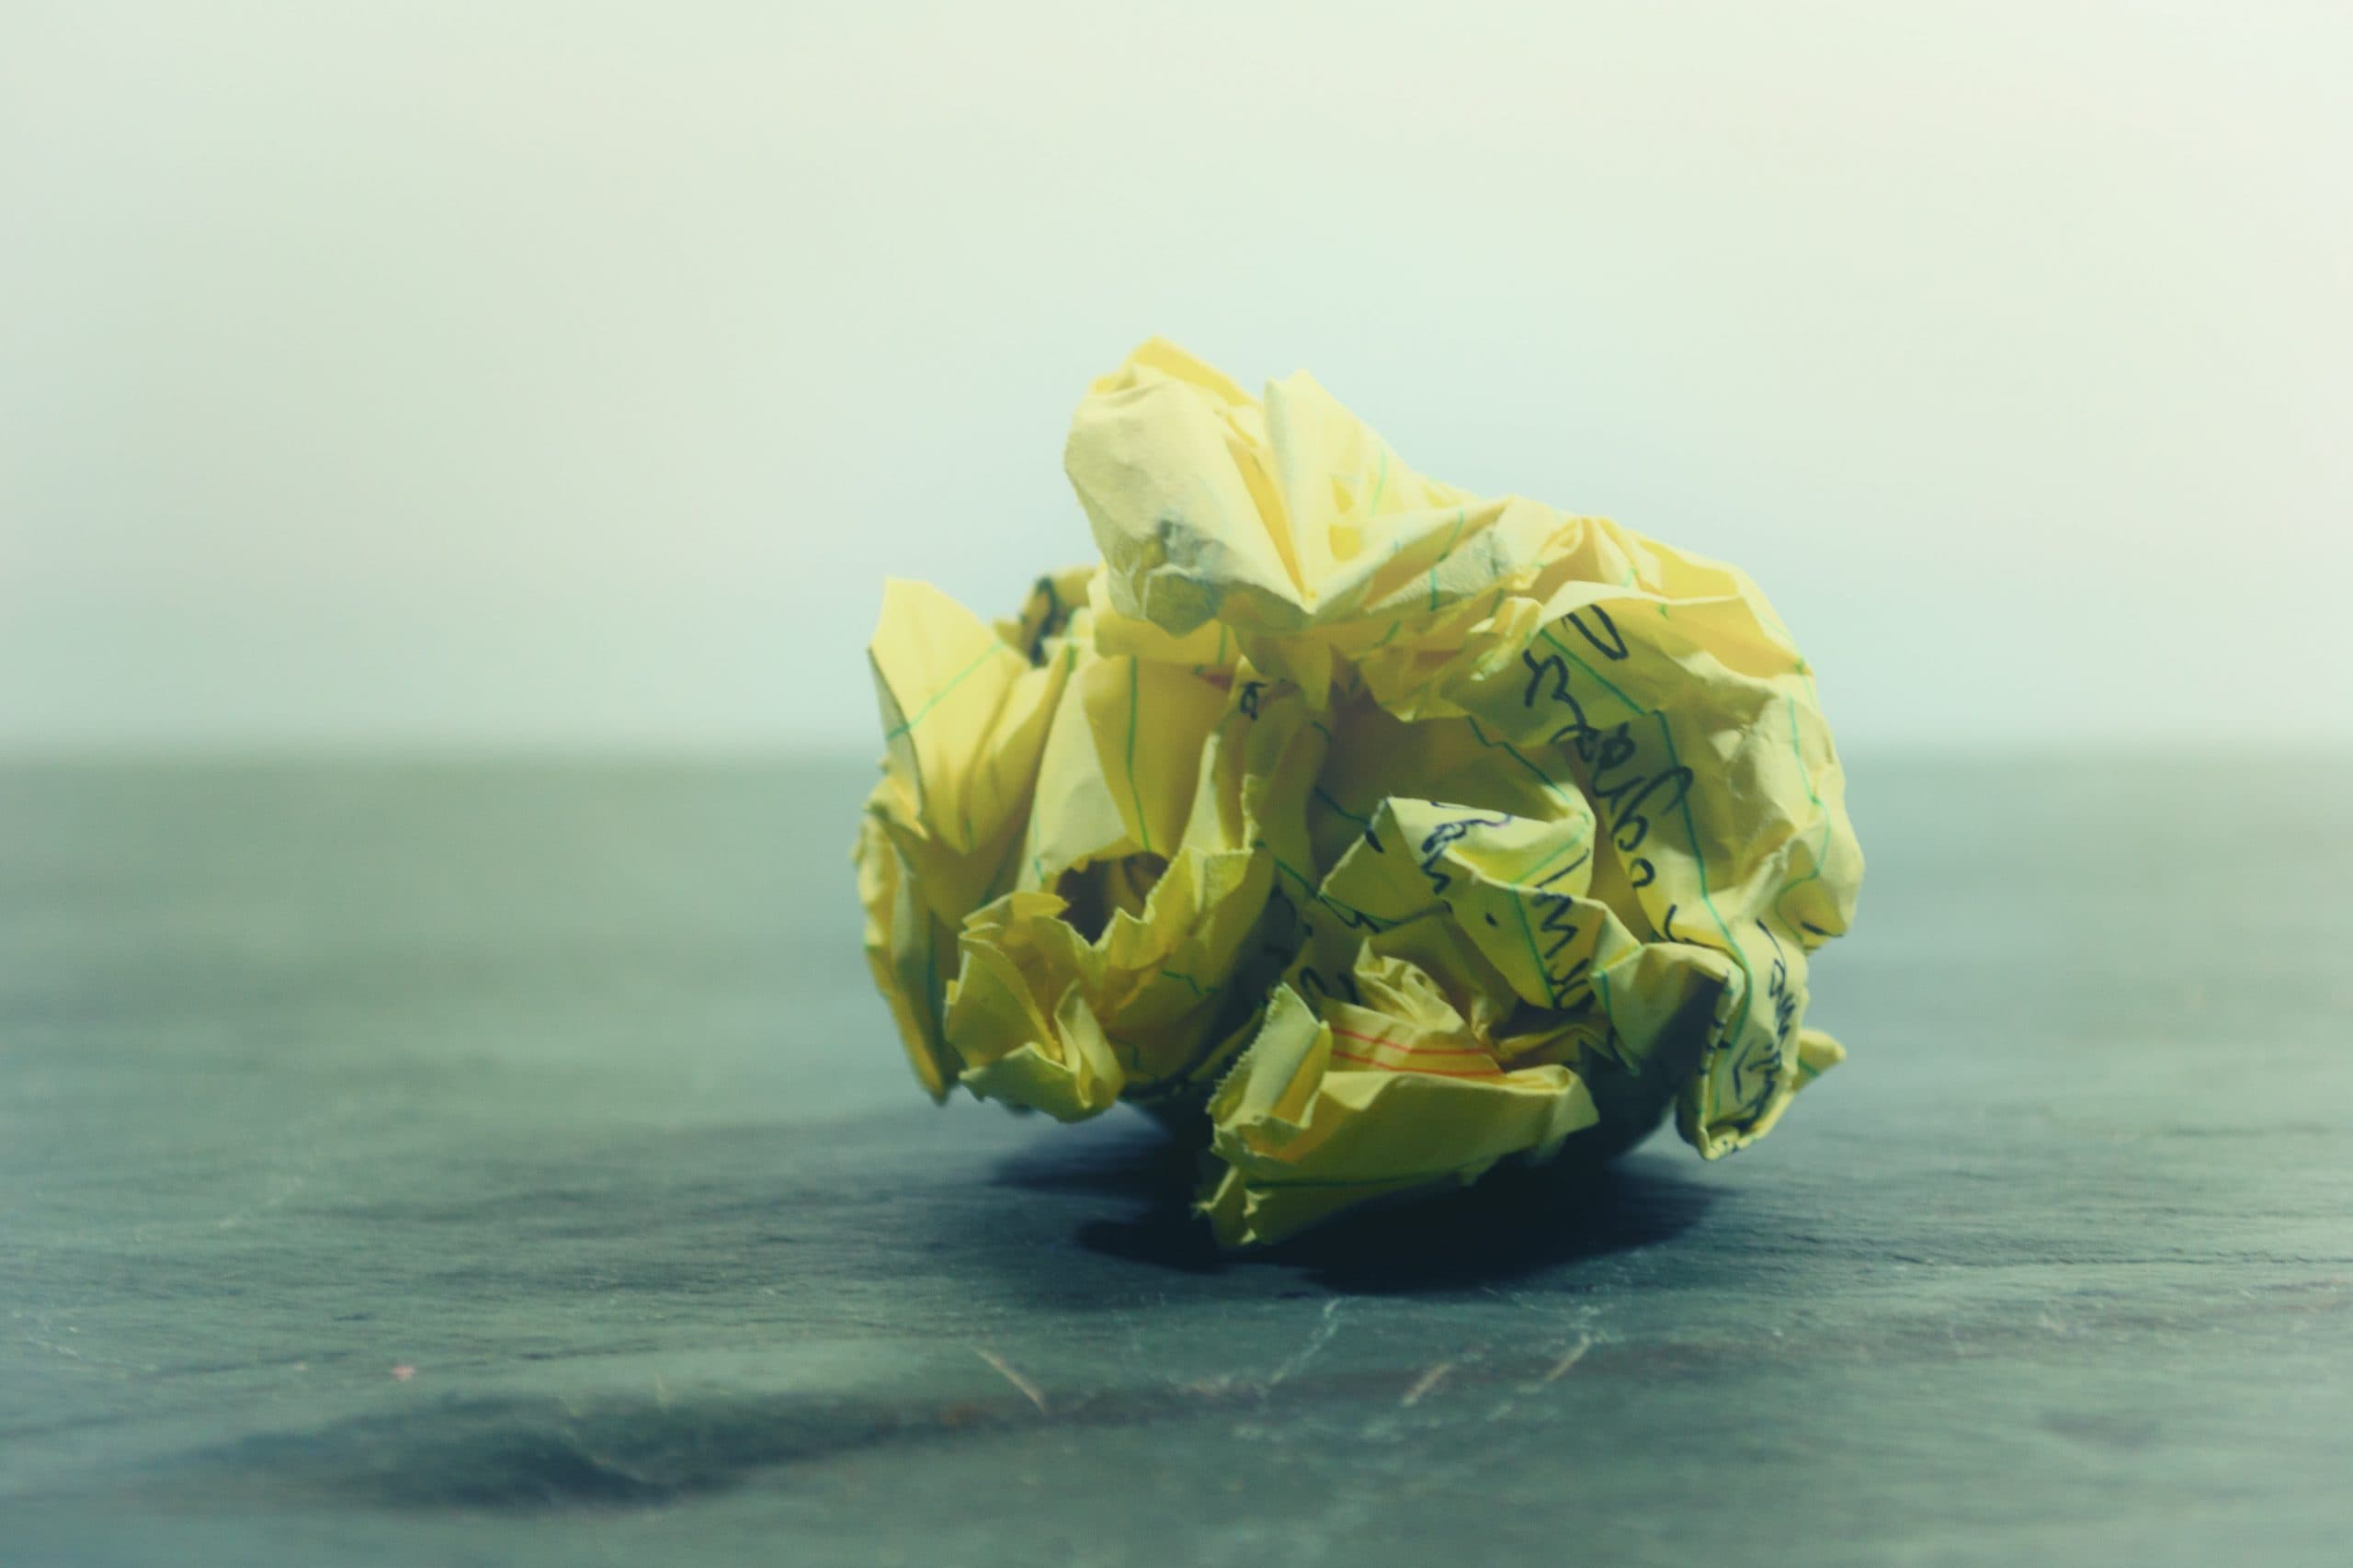 A piece of scrunched up yellow paper